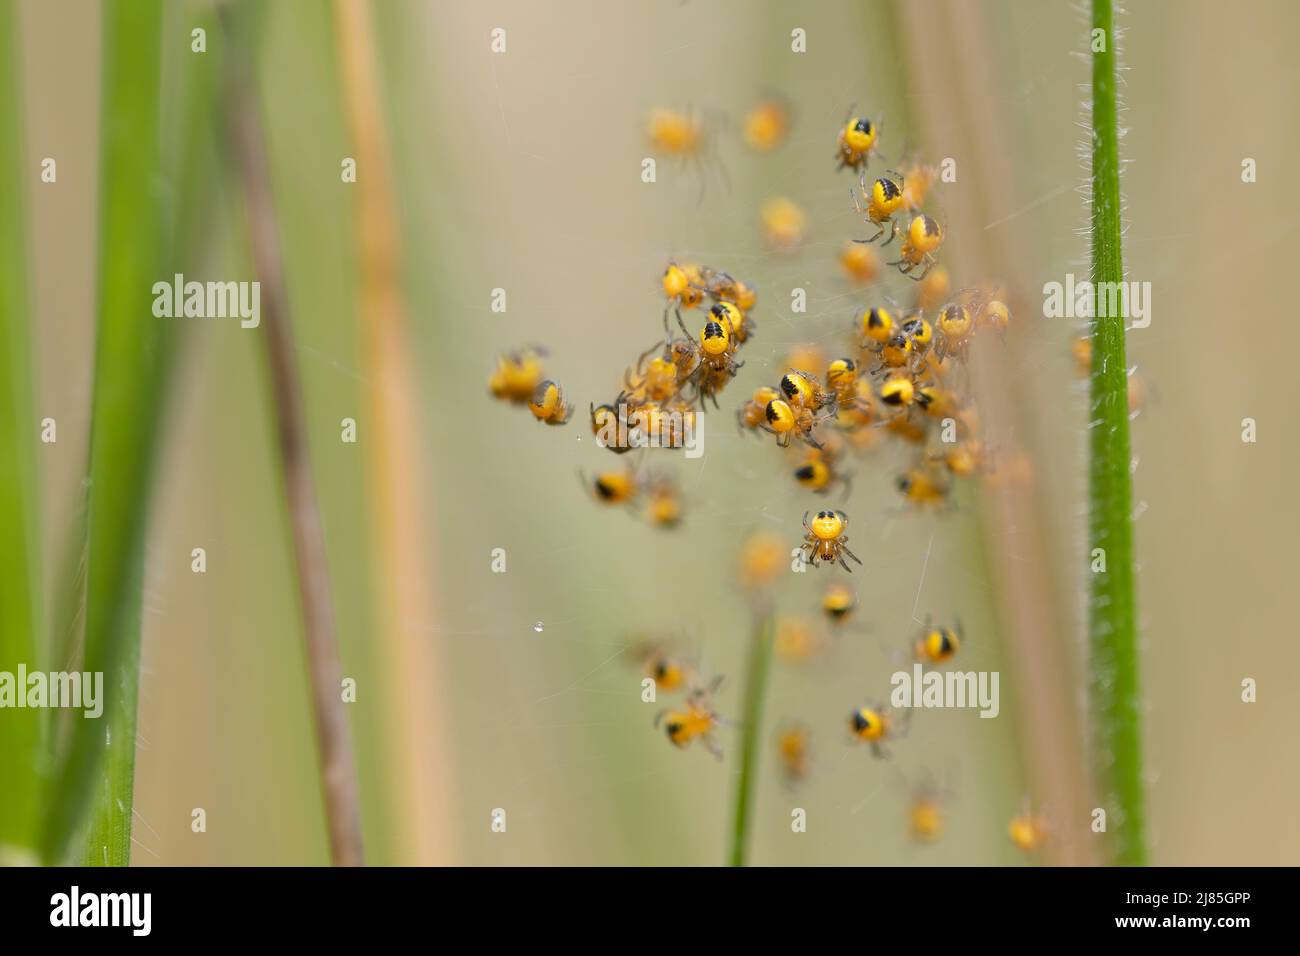 spiders of the species araneus diadematus in their web scattered. lots of black and yellow babies. Macro photography. Horizontal and copy space. detai Stock Photo